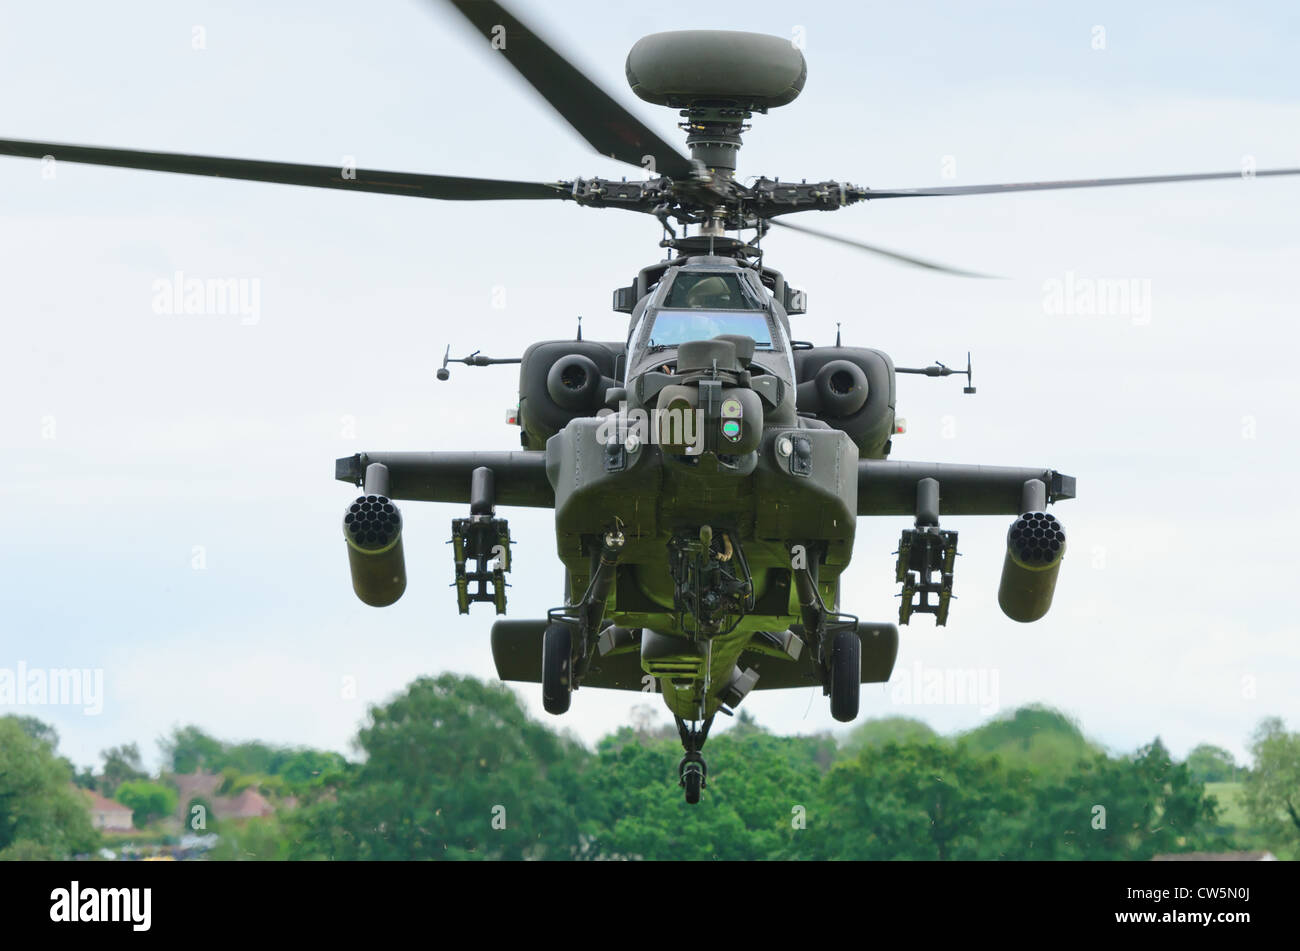 COSFORD, SHROPSHIRE, ENGLAND - JUNE 17: Boeing AH-64 Apache attack helicopter taking off for display. Stock Photo